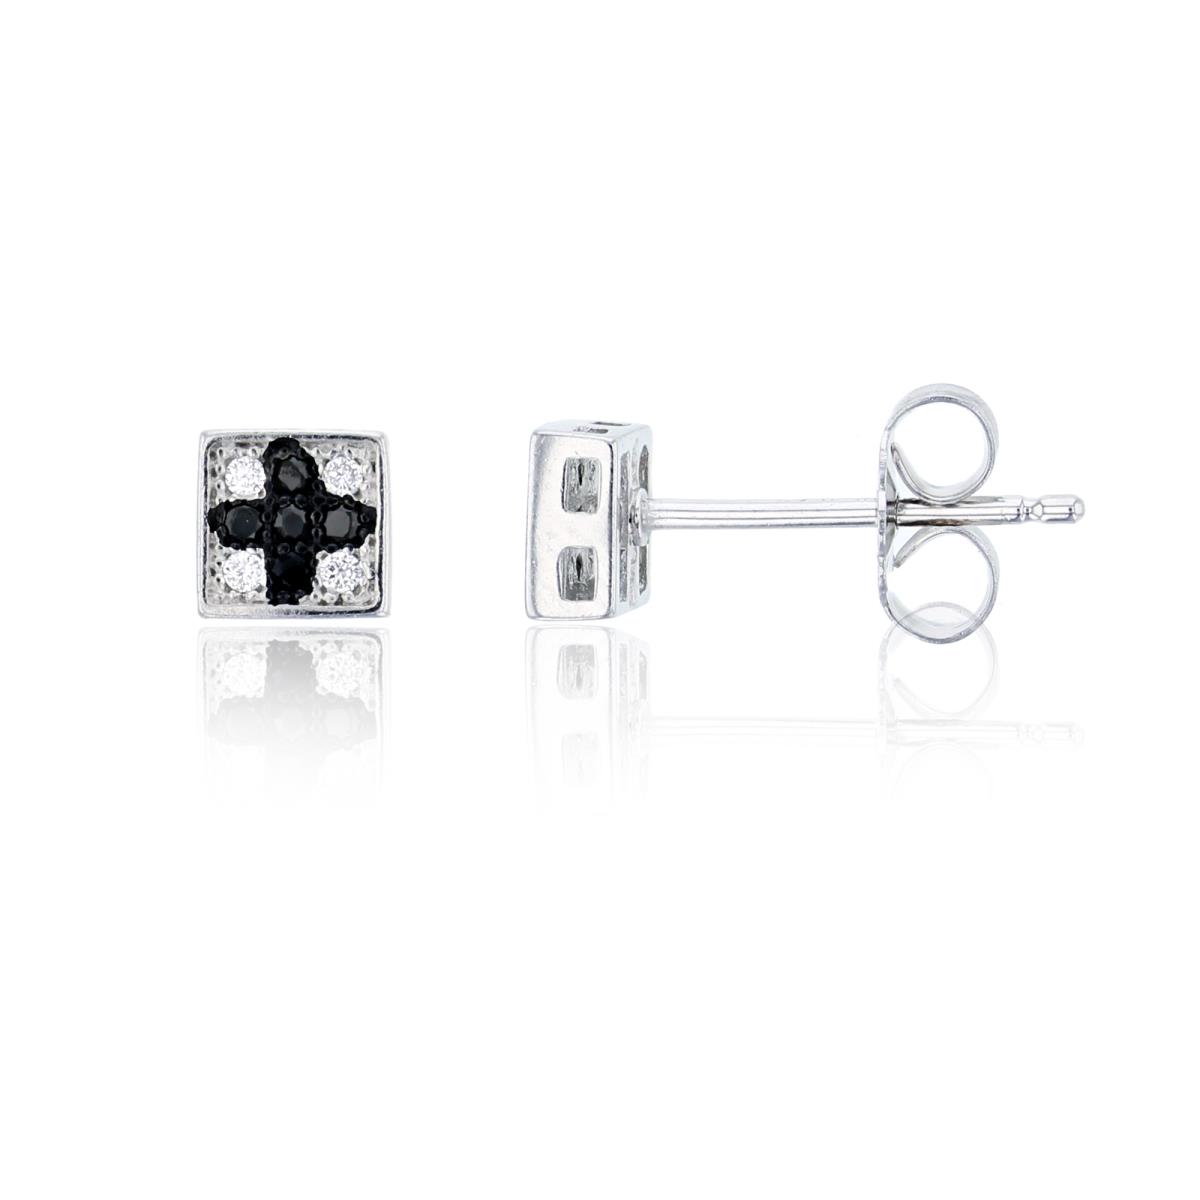 Sterling Silver Black & White 5.3x5.3mm Pave Square Stud Earring